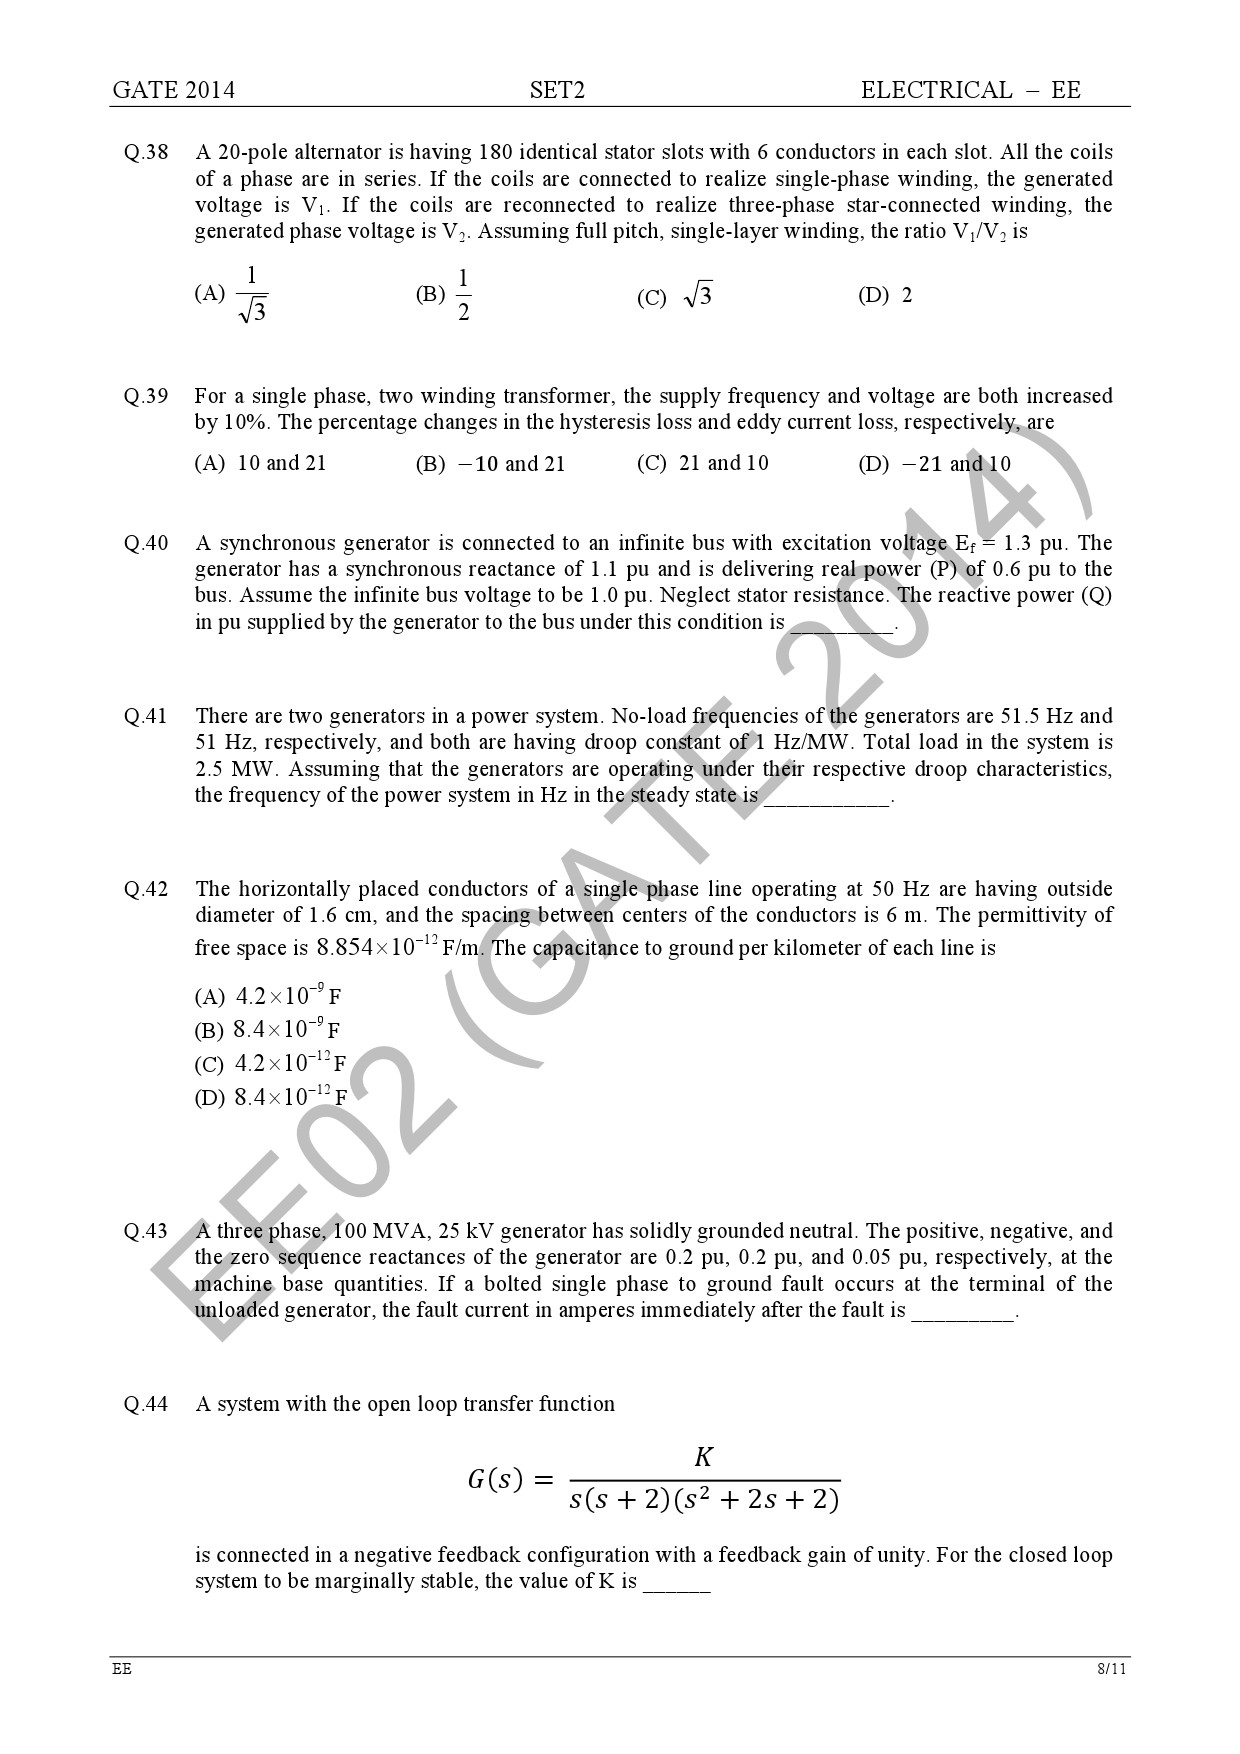 GATE Exam Question Paper 2014 Electrical Engineering Set 2 14